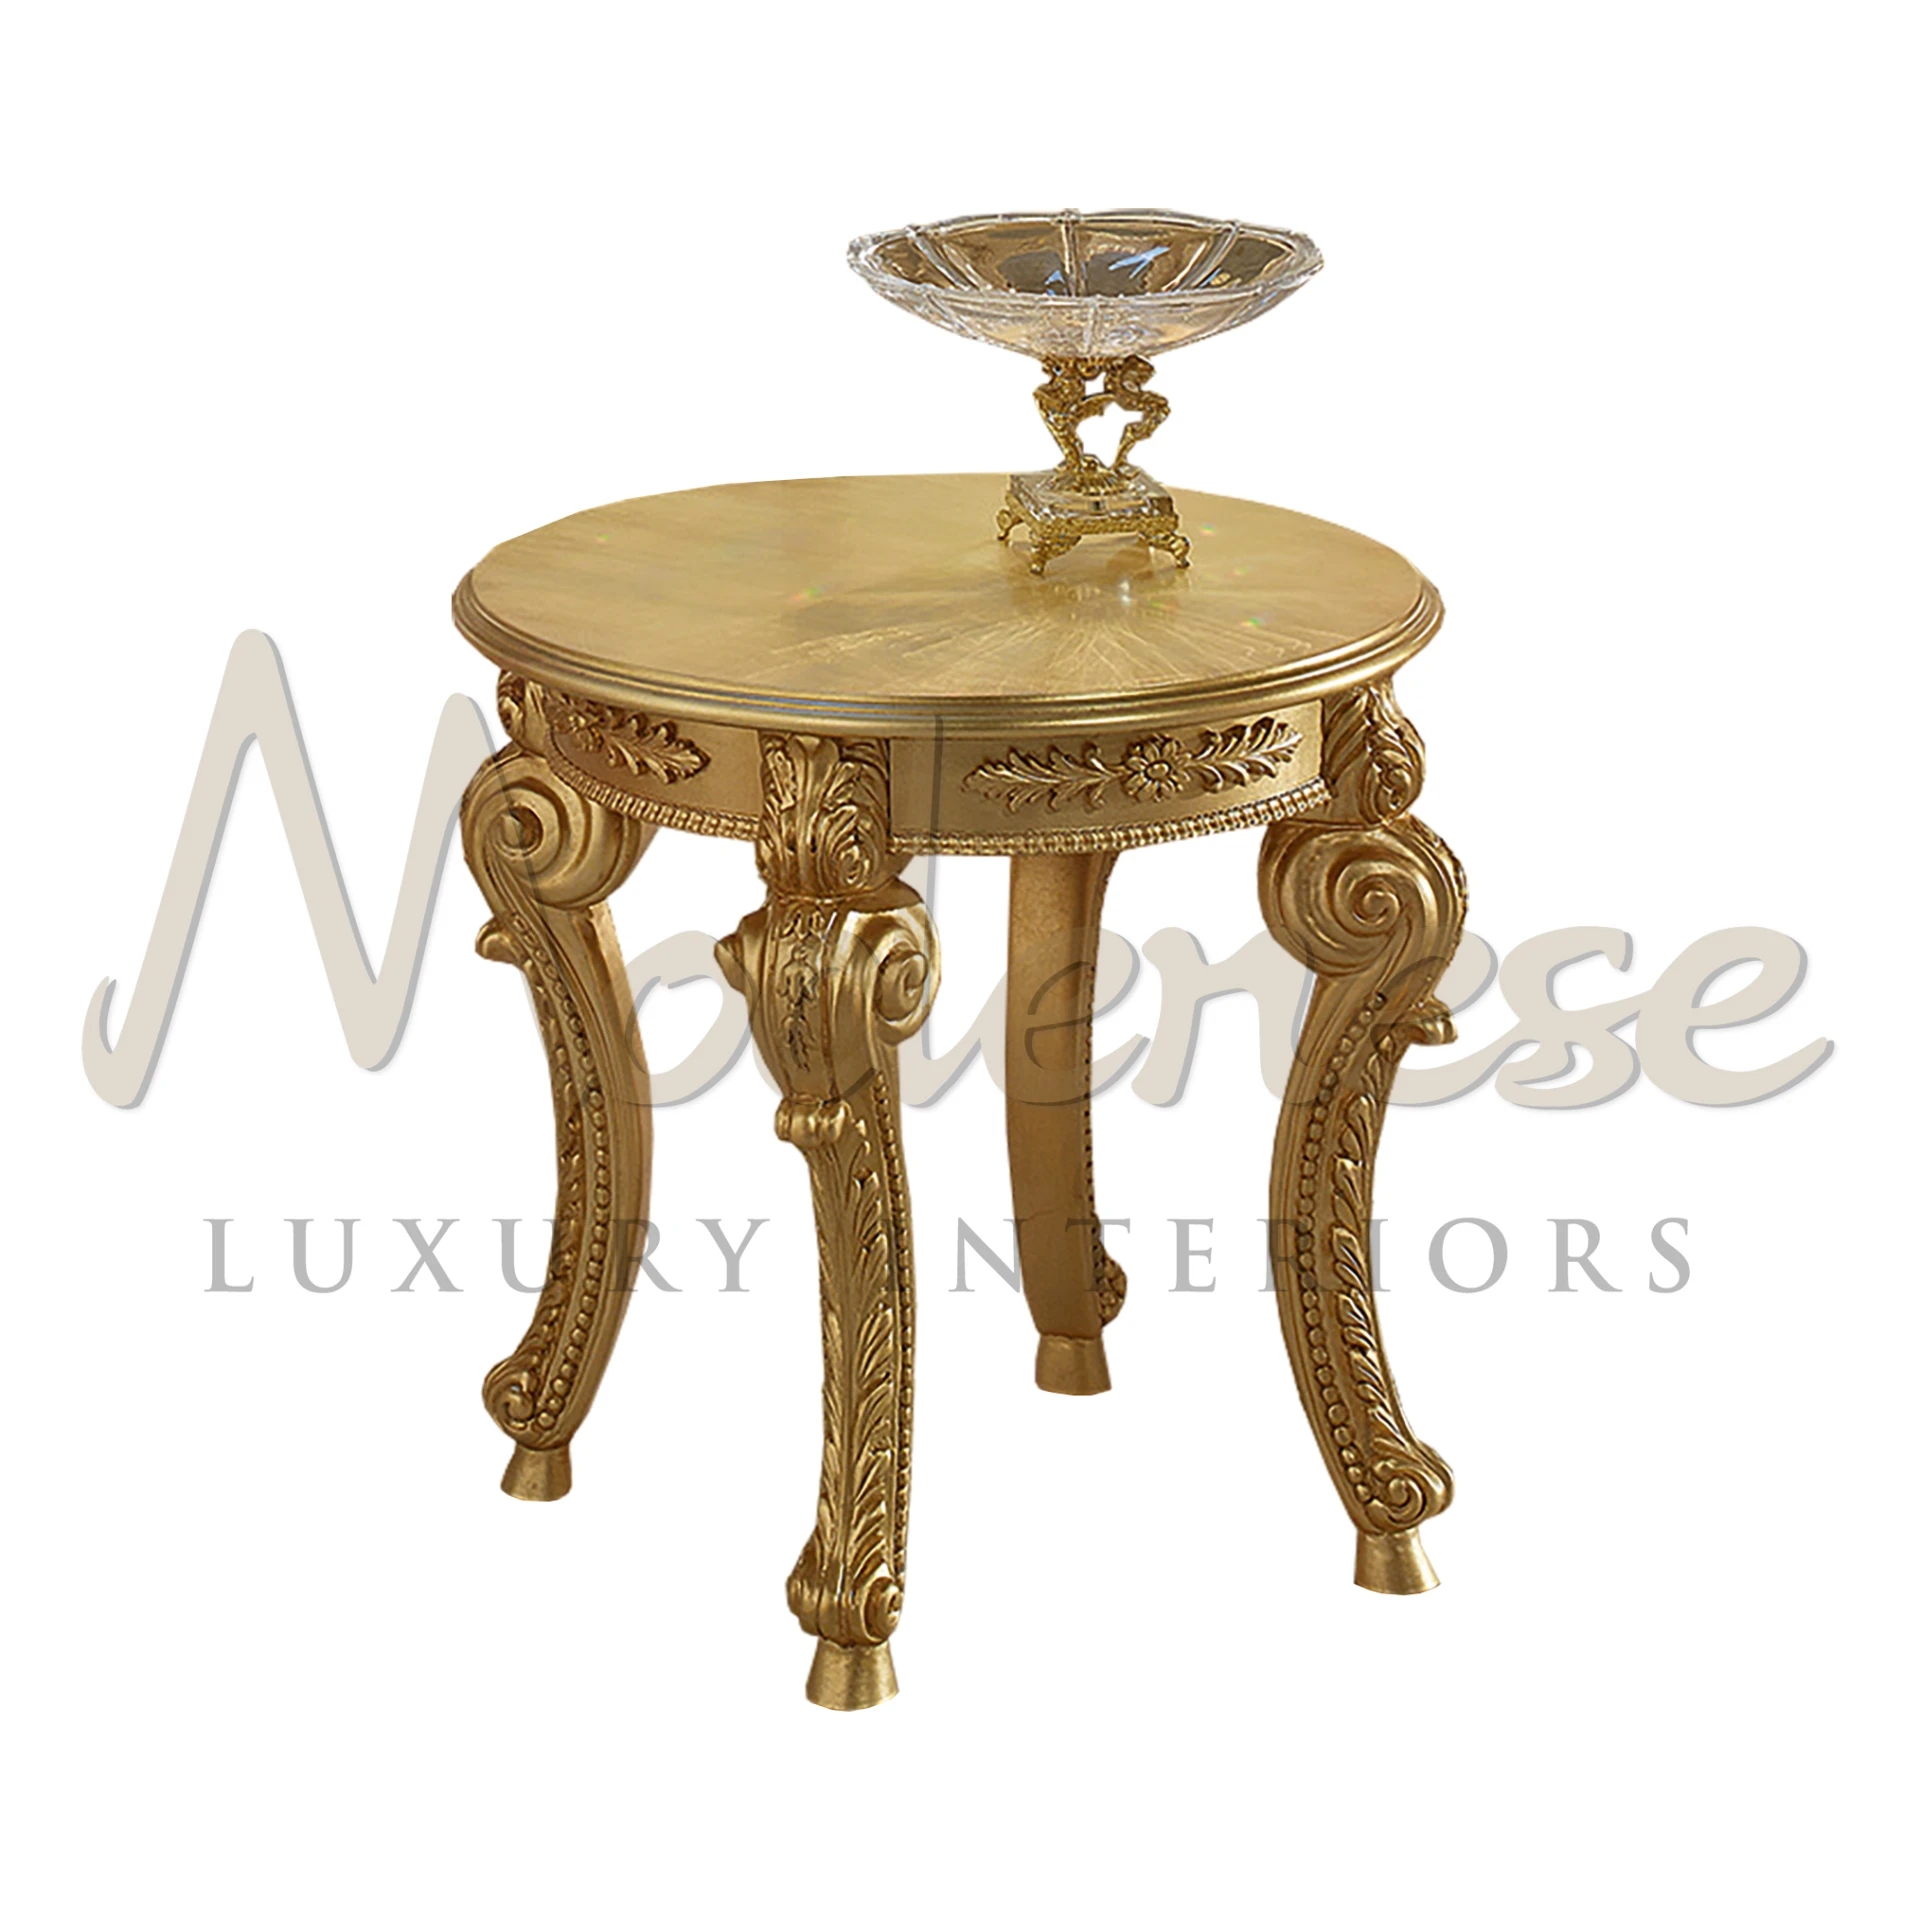 Gilded Splendor: Round Gold Coffee Table for Luxurious Living